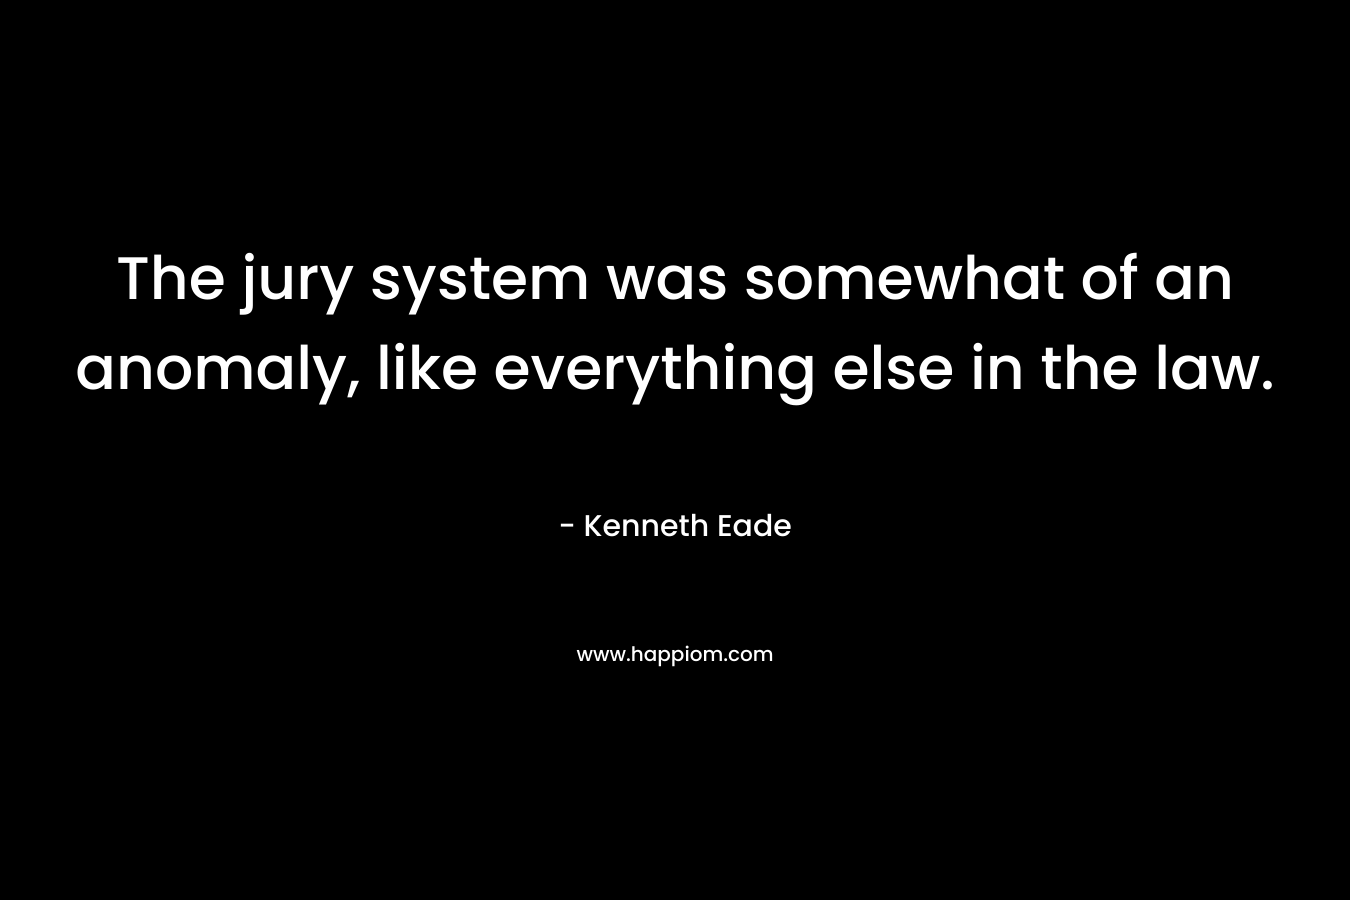 The jury system was somewhat of an anomaly, like everything else in the law. – Kenneth Eade